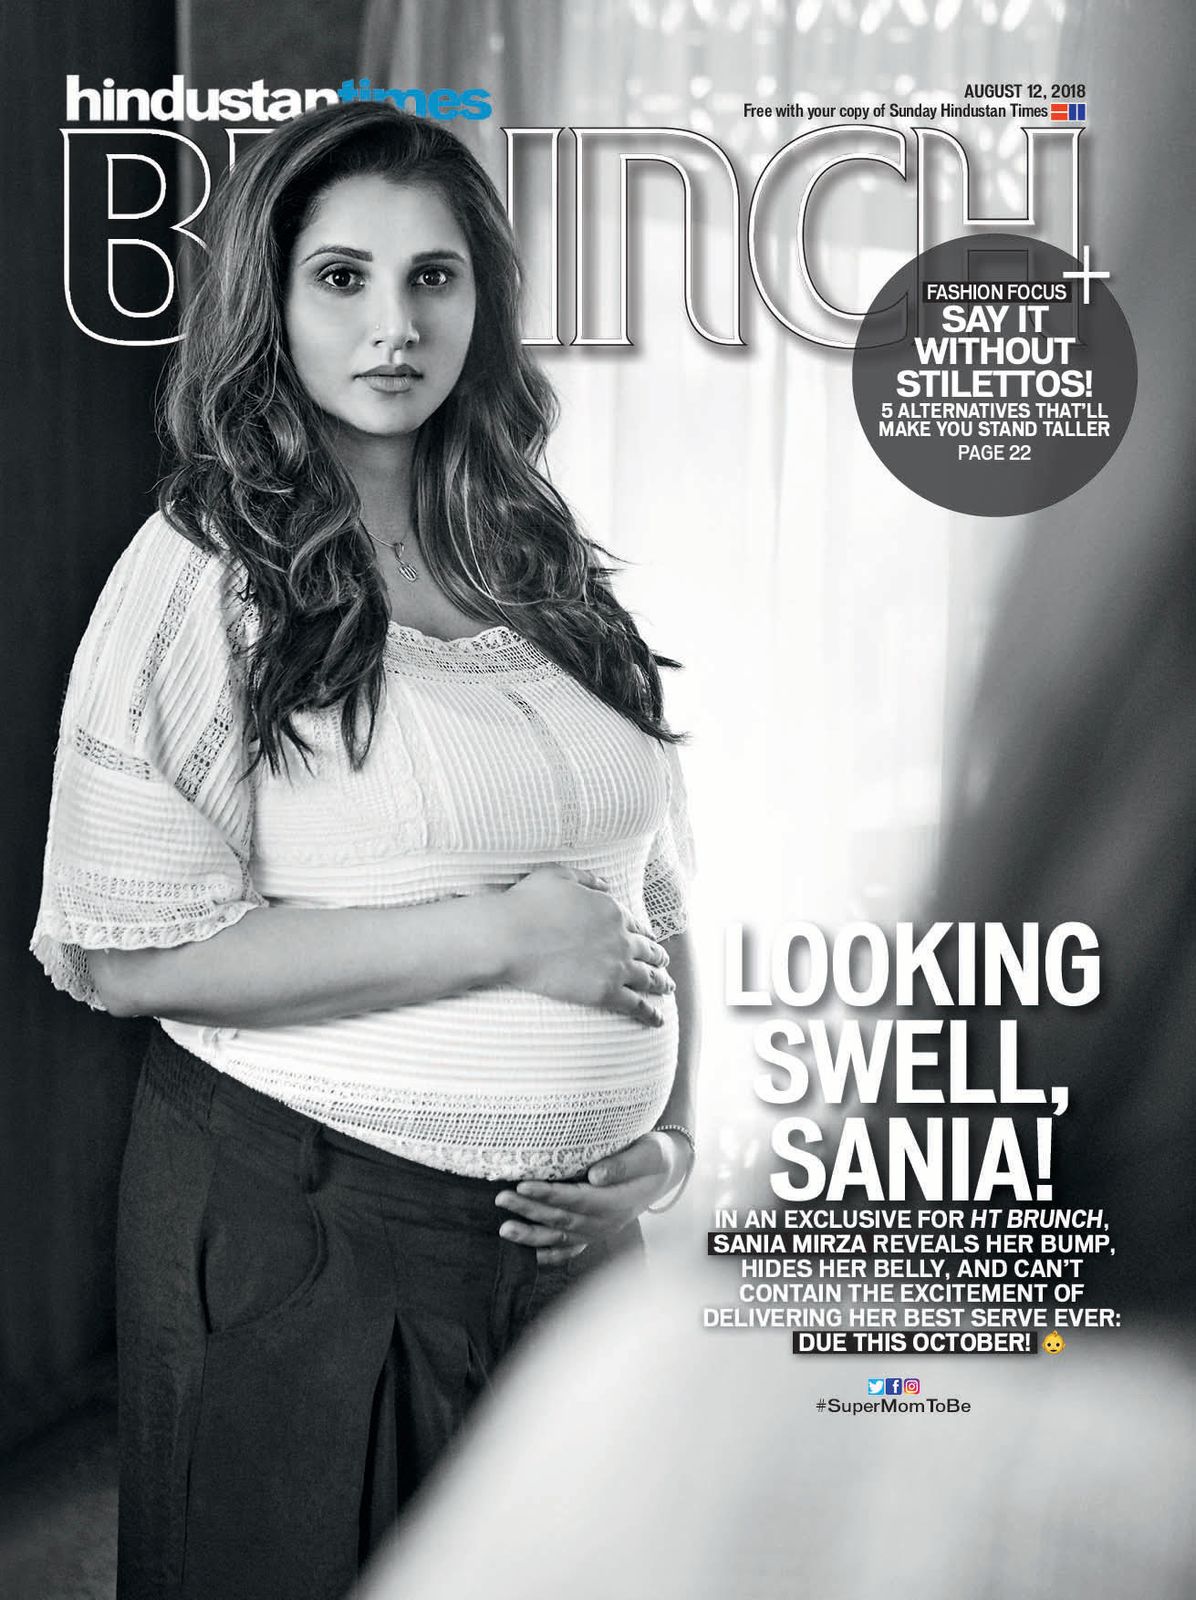 Check Out! Seven Months Pregnant Sania Mirza Looks Swell On The Cover Of HT Brunch!